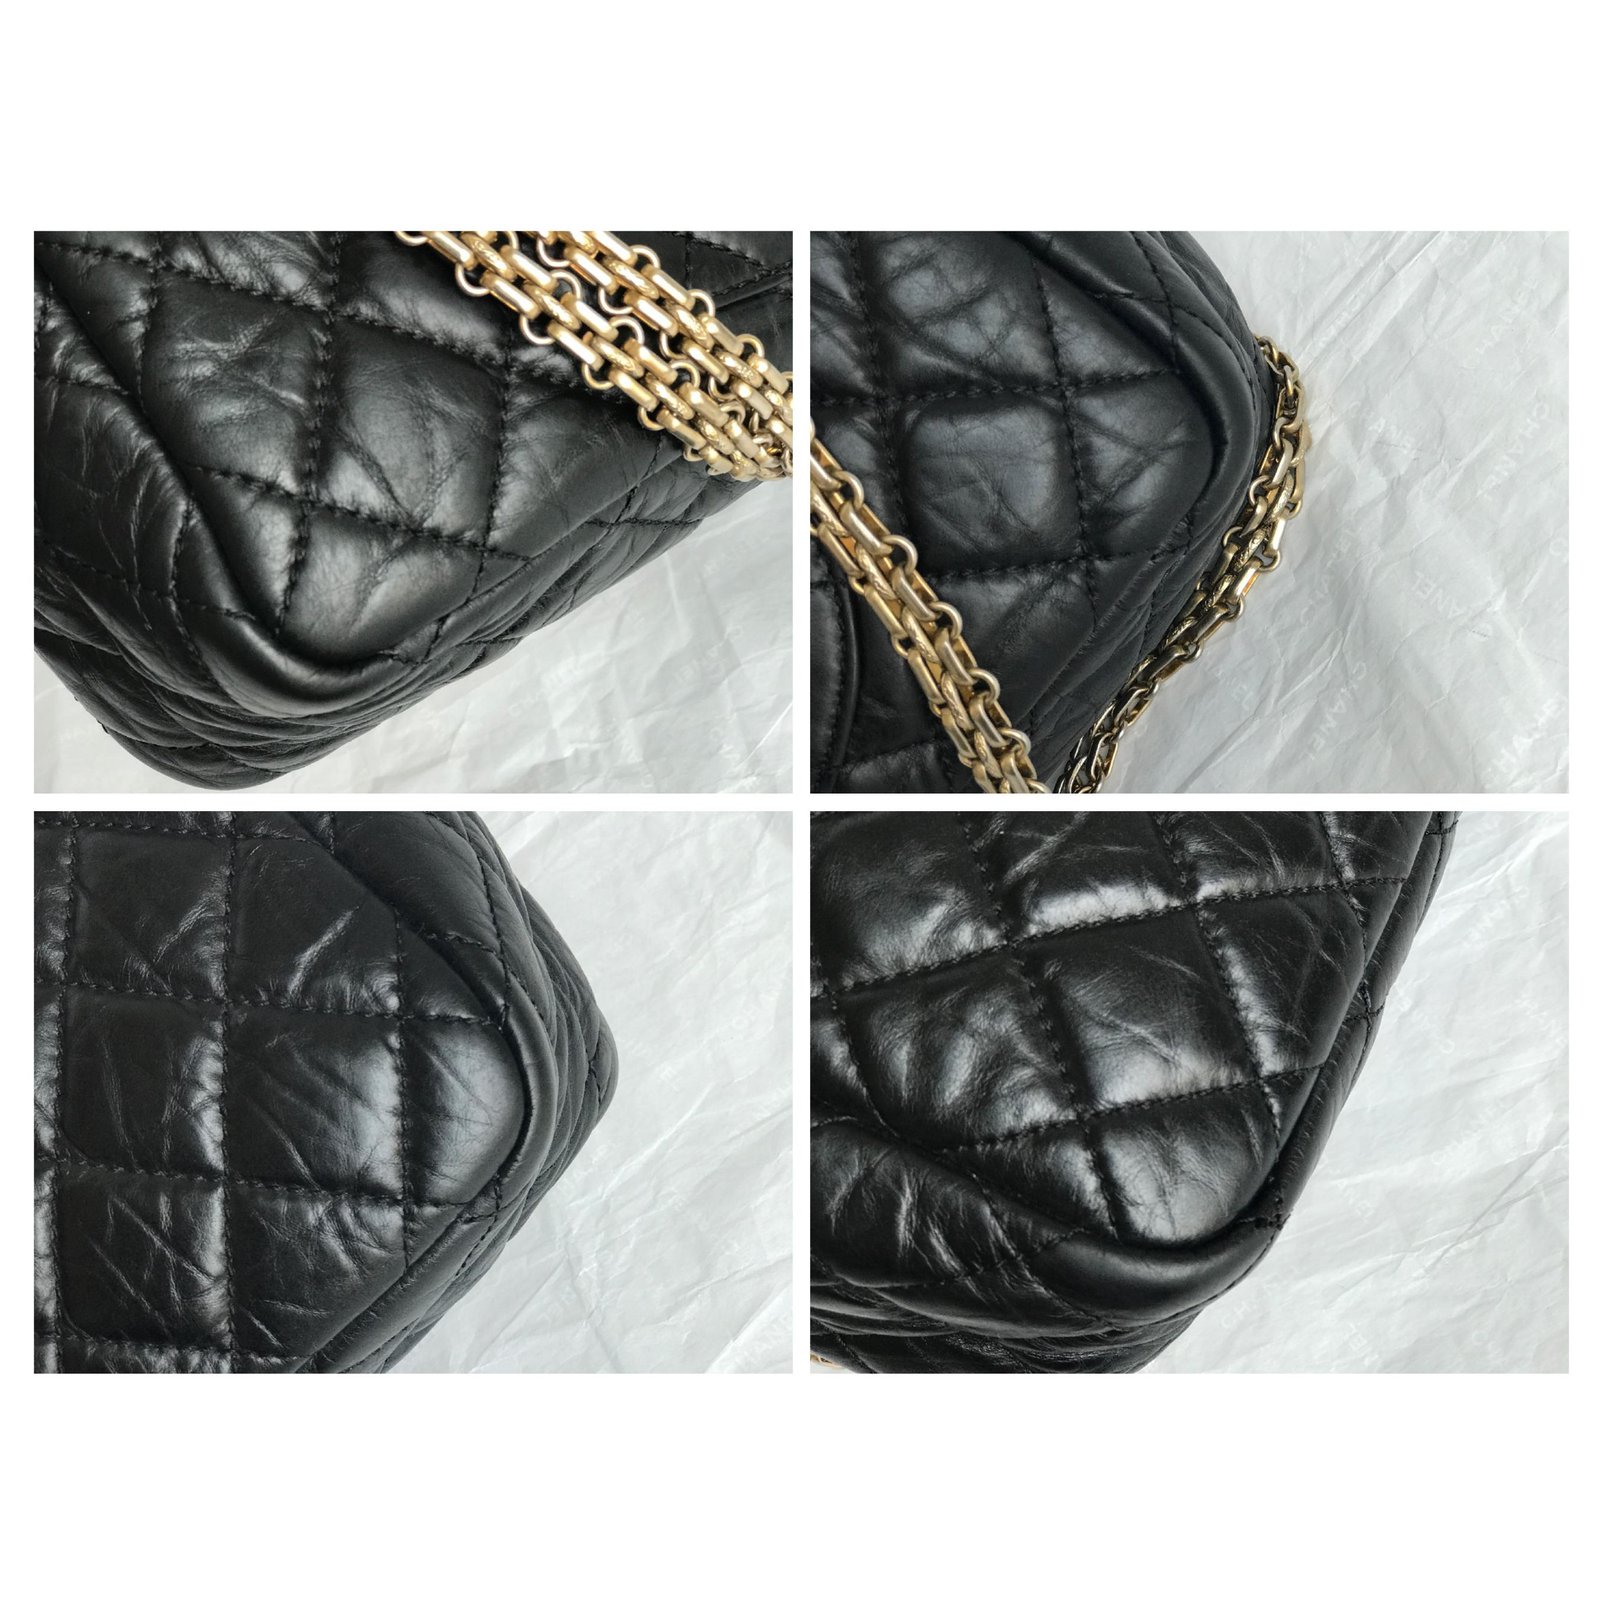 Chanel Camera Bag 30 cm with box, Dustbag Black Leather ref.190942